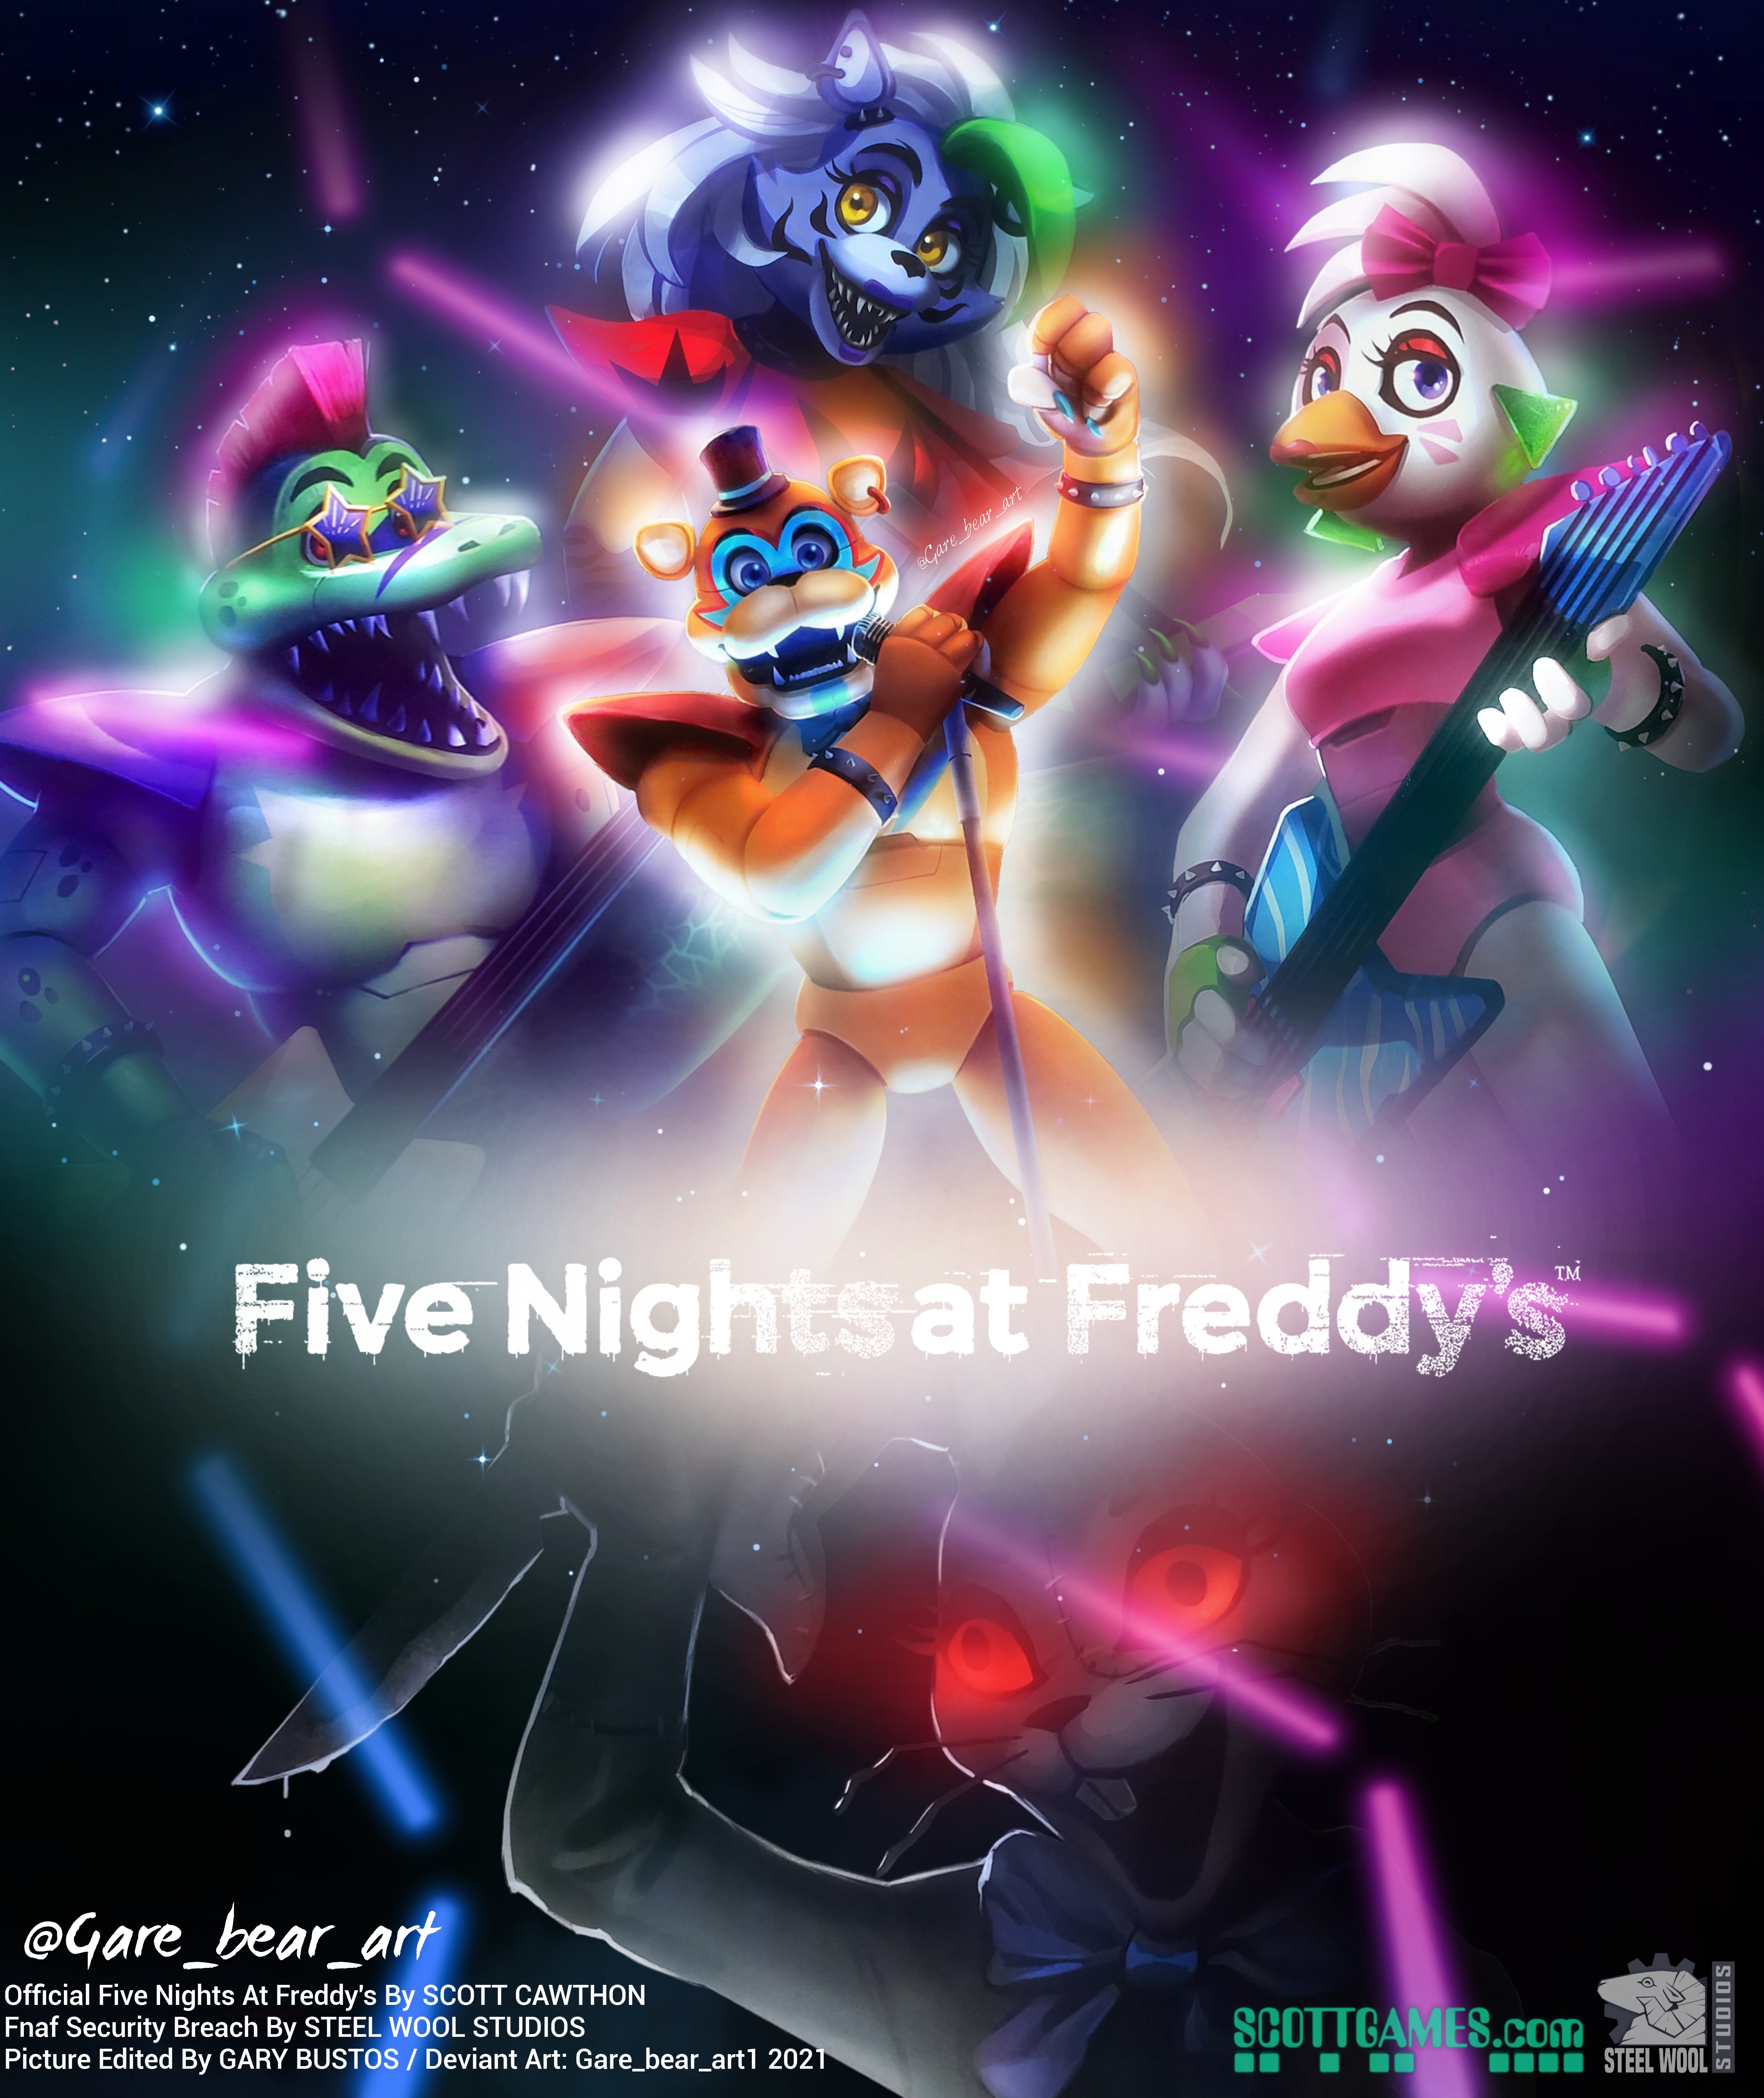 34+] Five Nights At Freddy's: Security Breach Wallpapers - WallpaperSafari